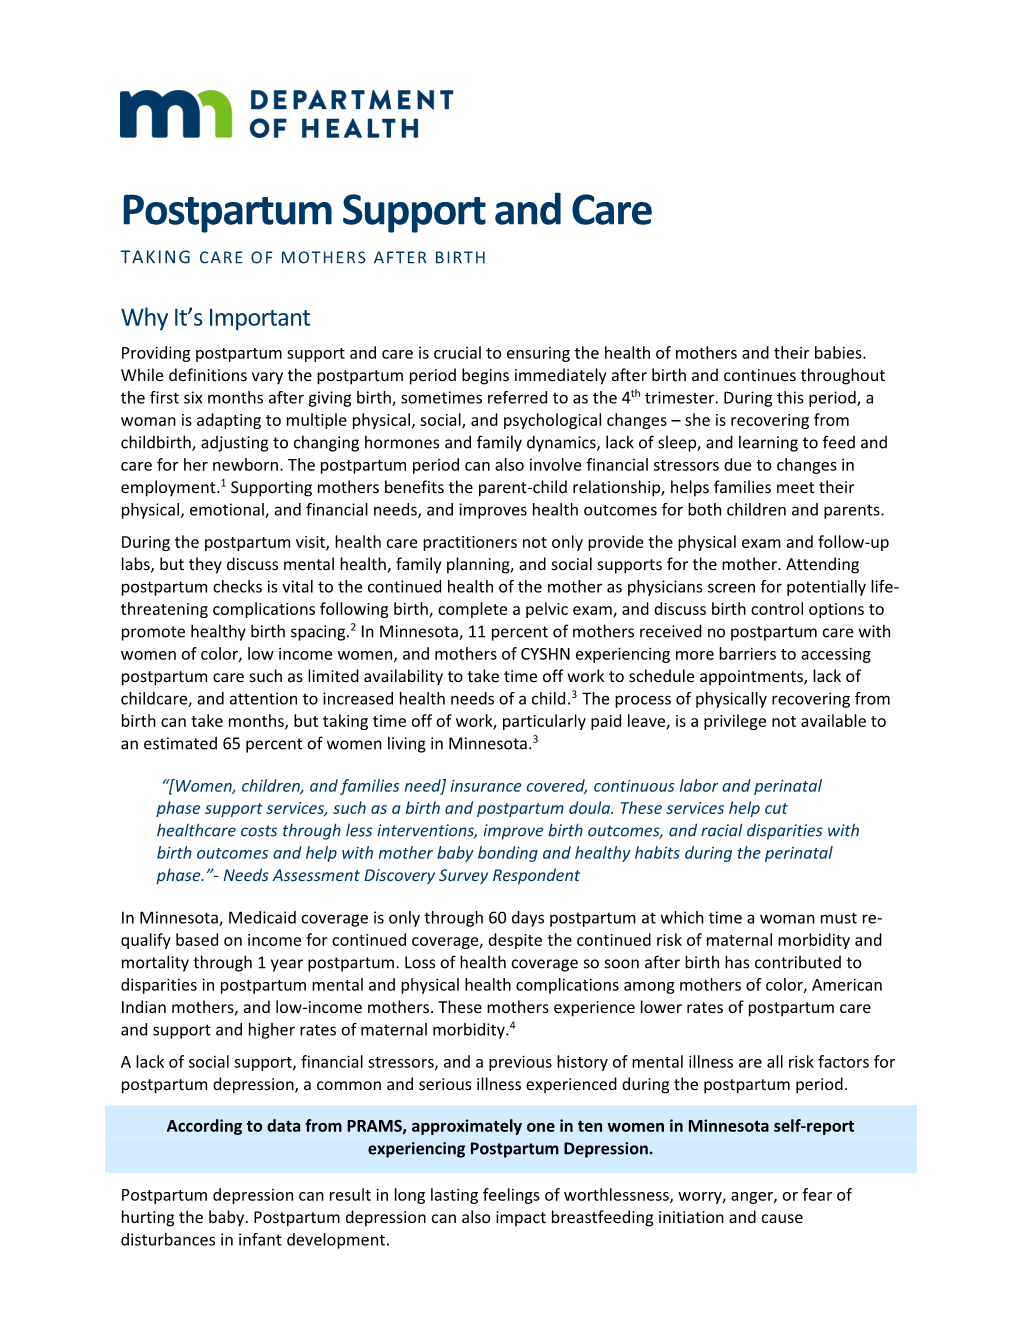 Postpartum Support and Care TAKING CARE of MOTHERS AFTER BIRTH